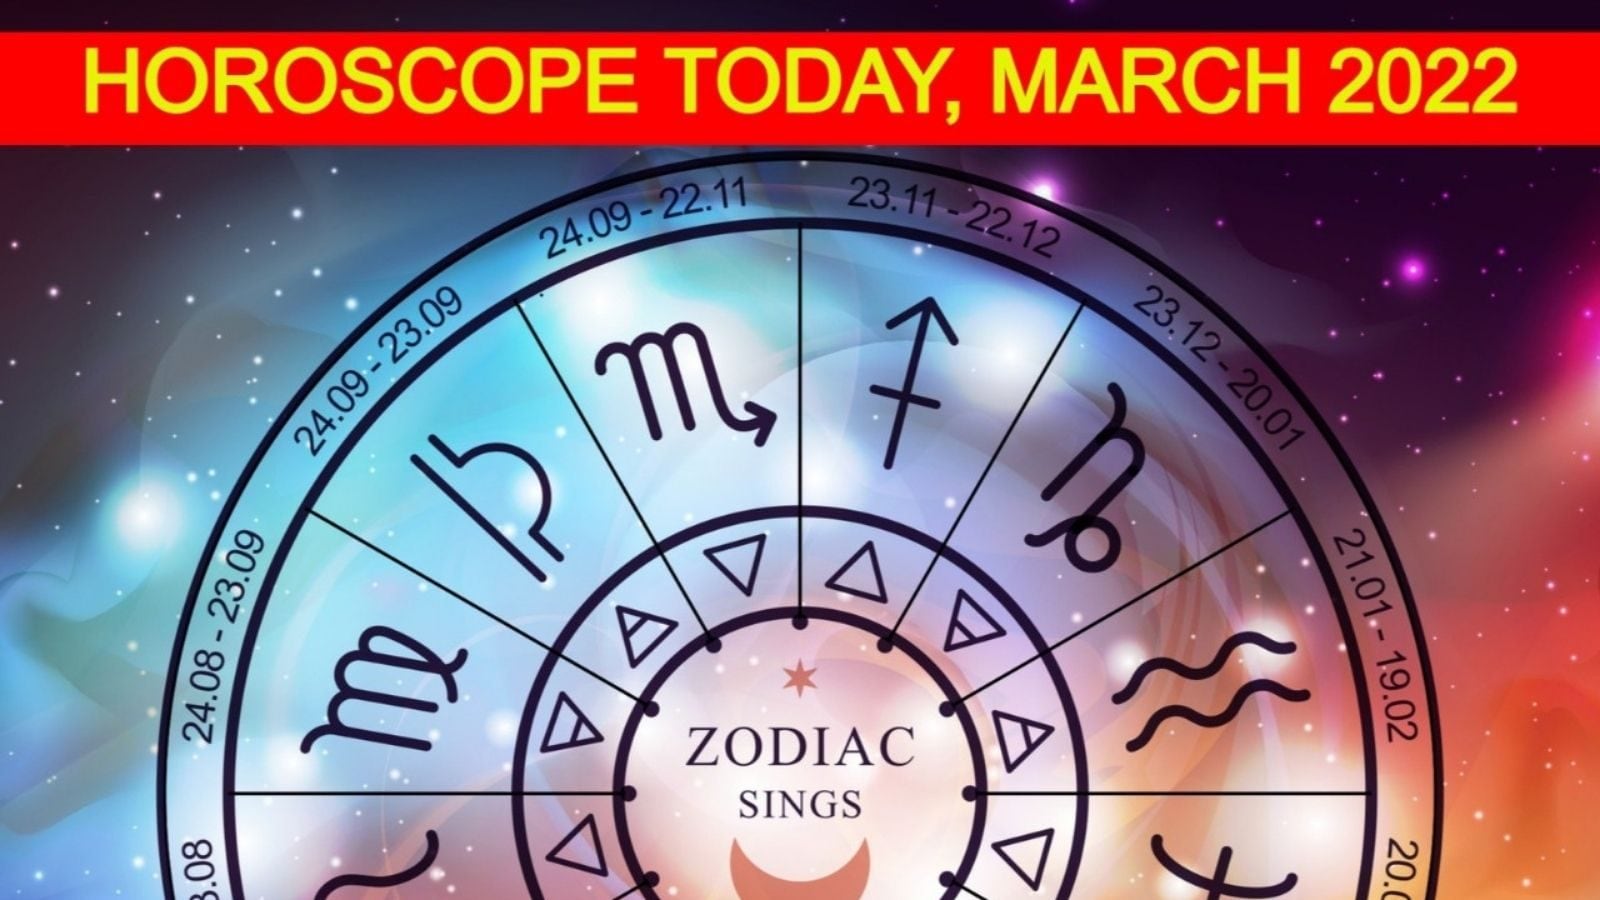 Check Out Daily Astrological Predictions for Aries, Taurus, Cancer, Sagittarius And Other Zodiac Signs for Thursday